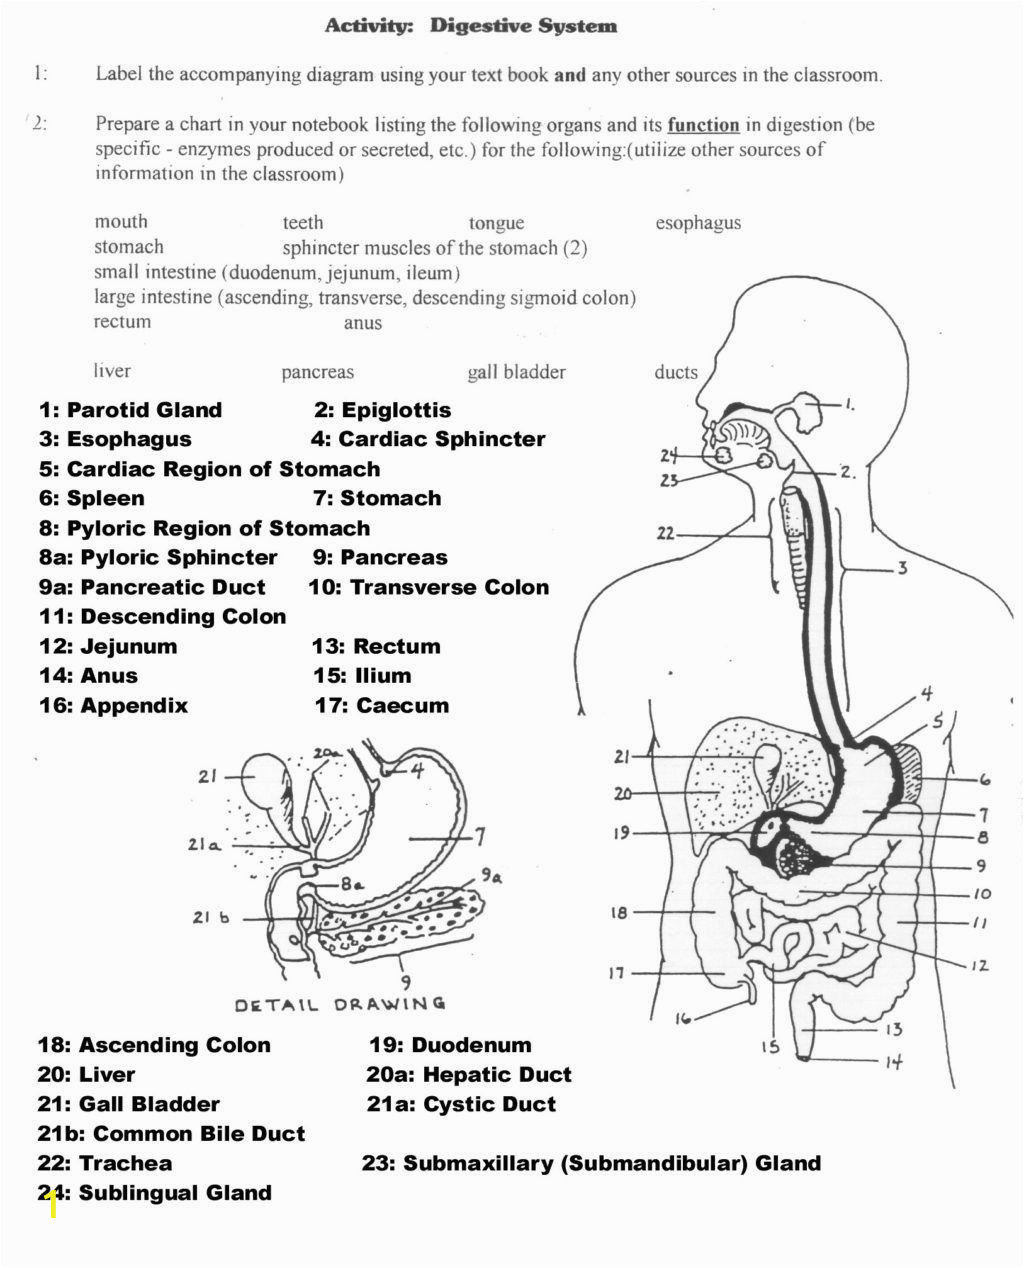 Anatomy and Physiology Coloring Workbook Page 188 Answers Anatomy and Physiology Coloring Workbook Answer Key New